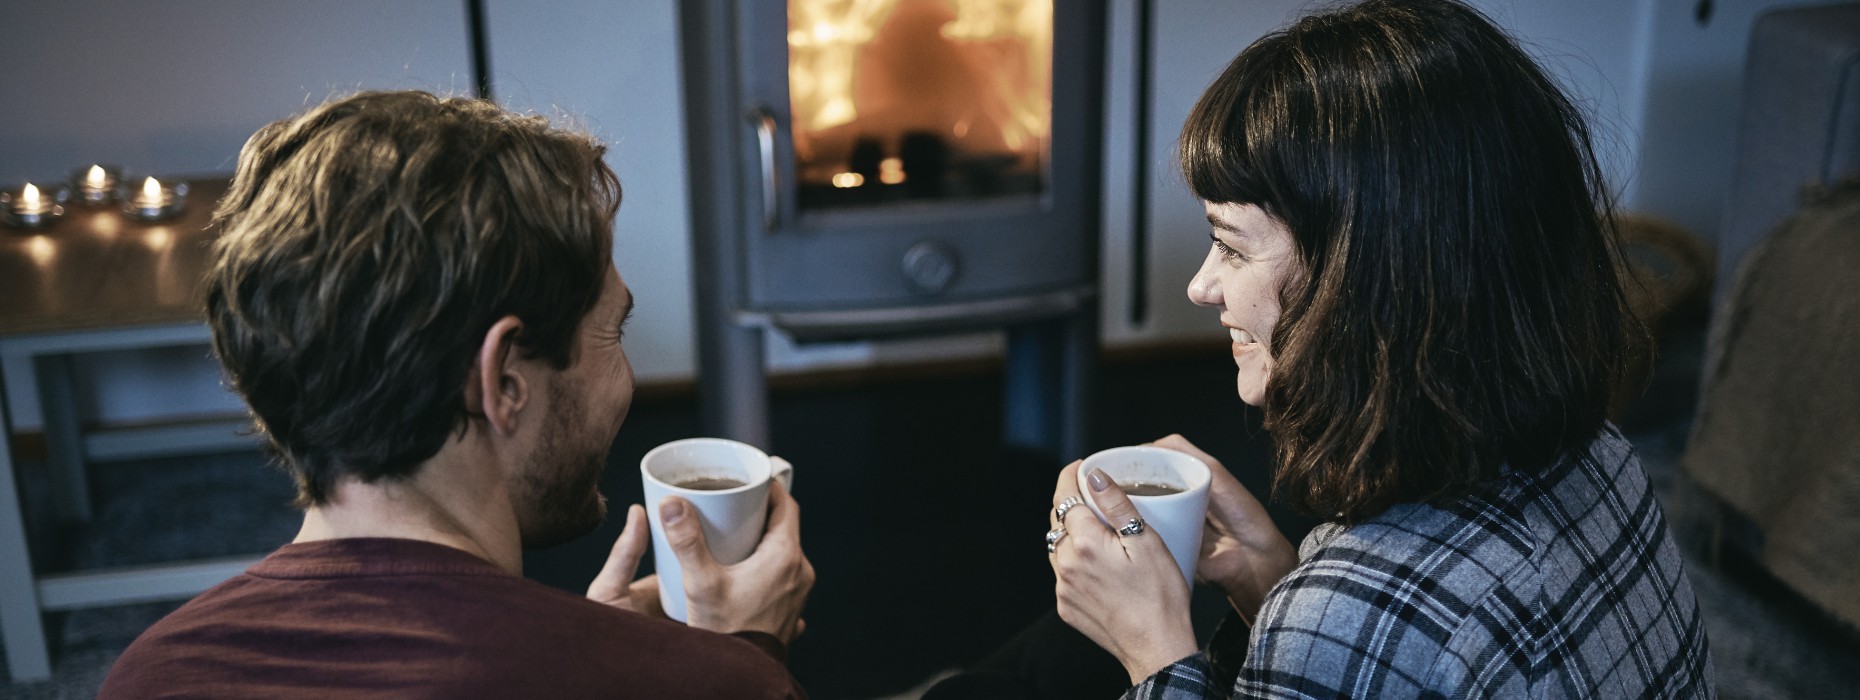 Couple sitting in front of fire